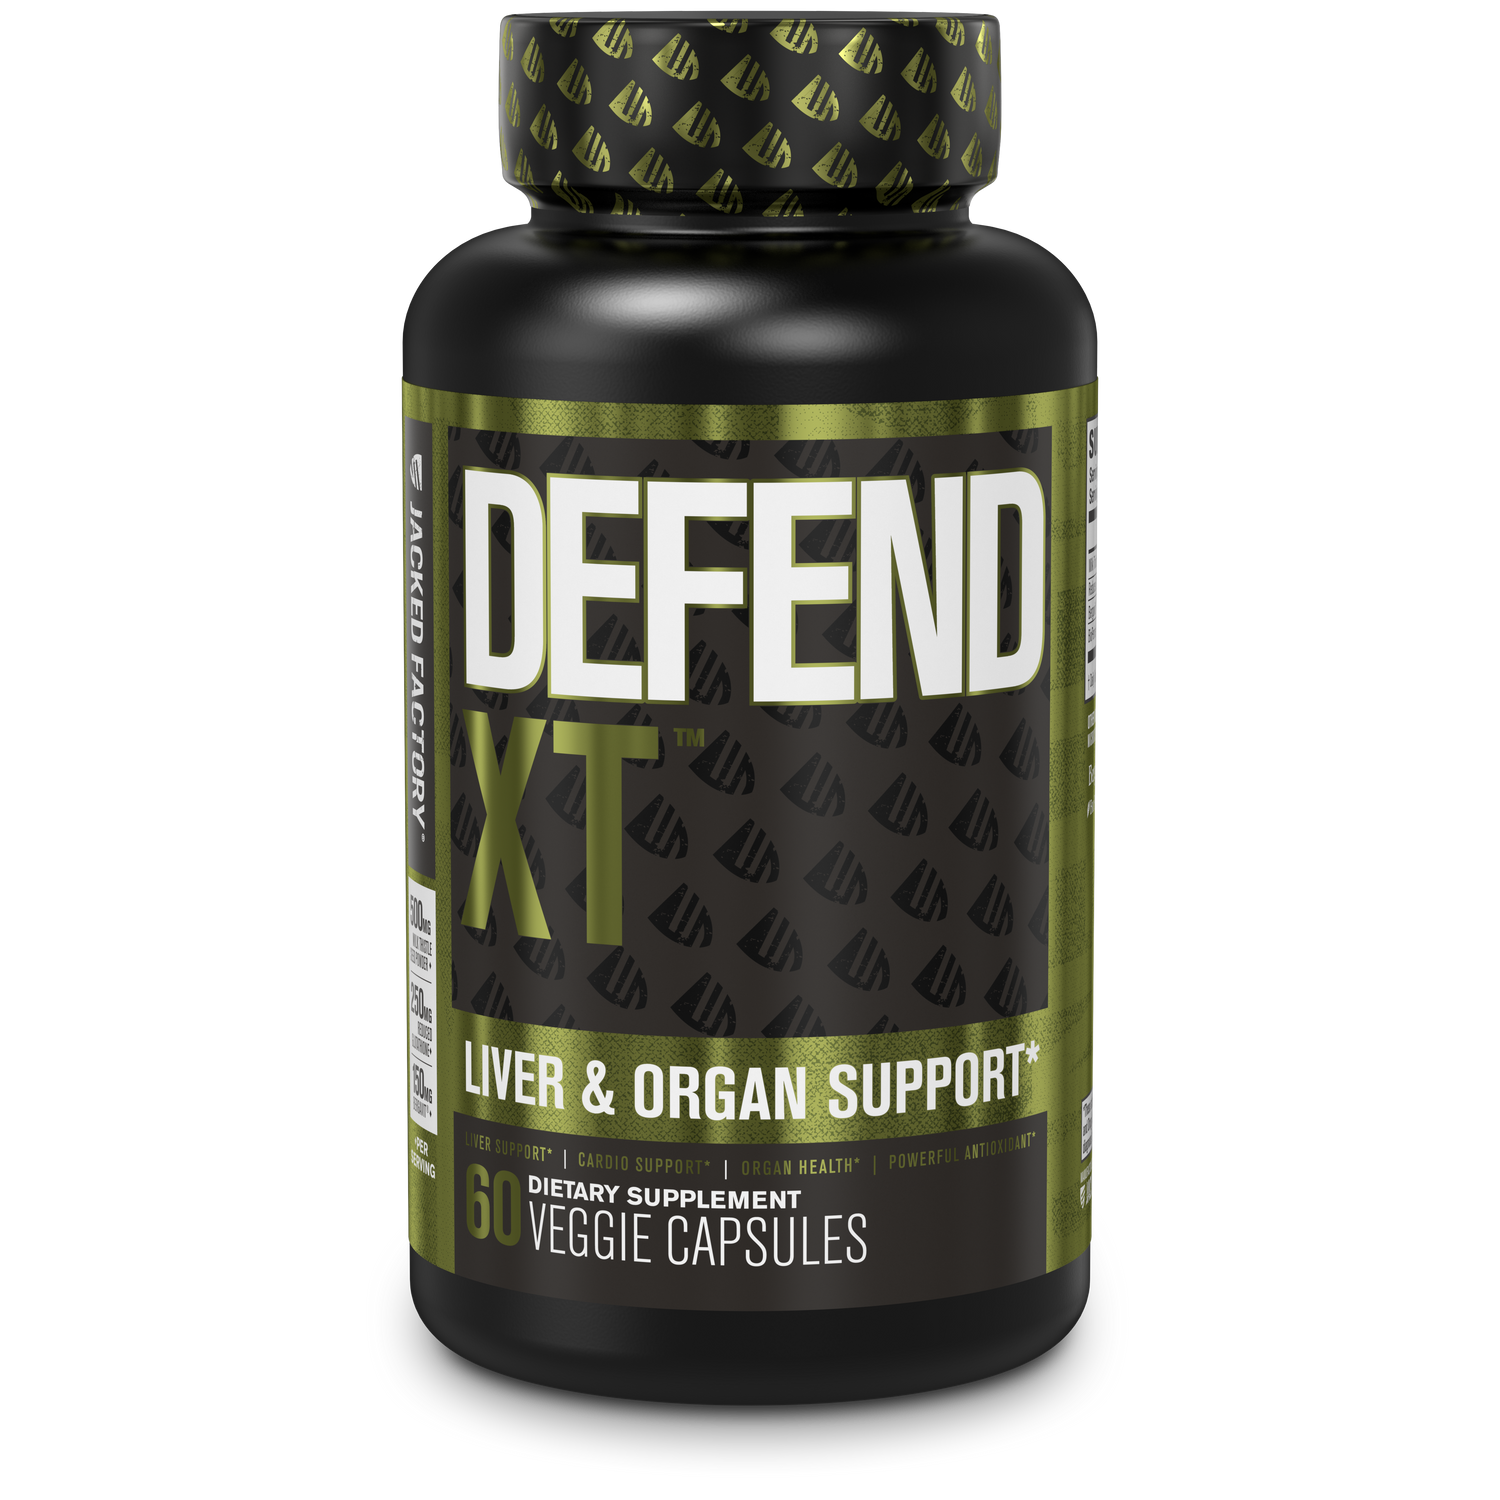 Jacked Factory's Defend-XT (60 veggie capsules) in a black bottle with dark army green label